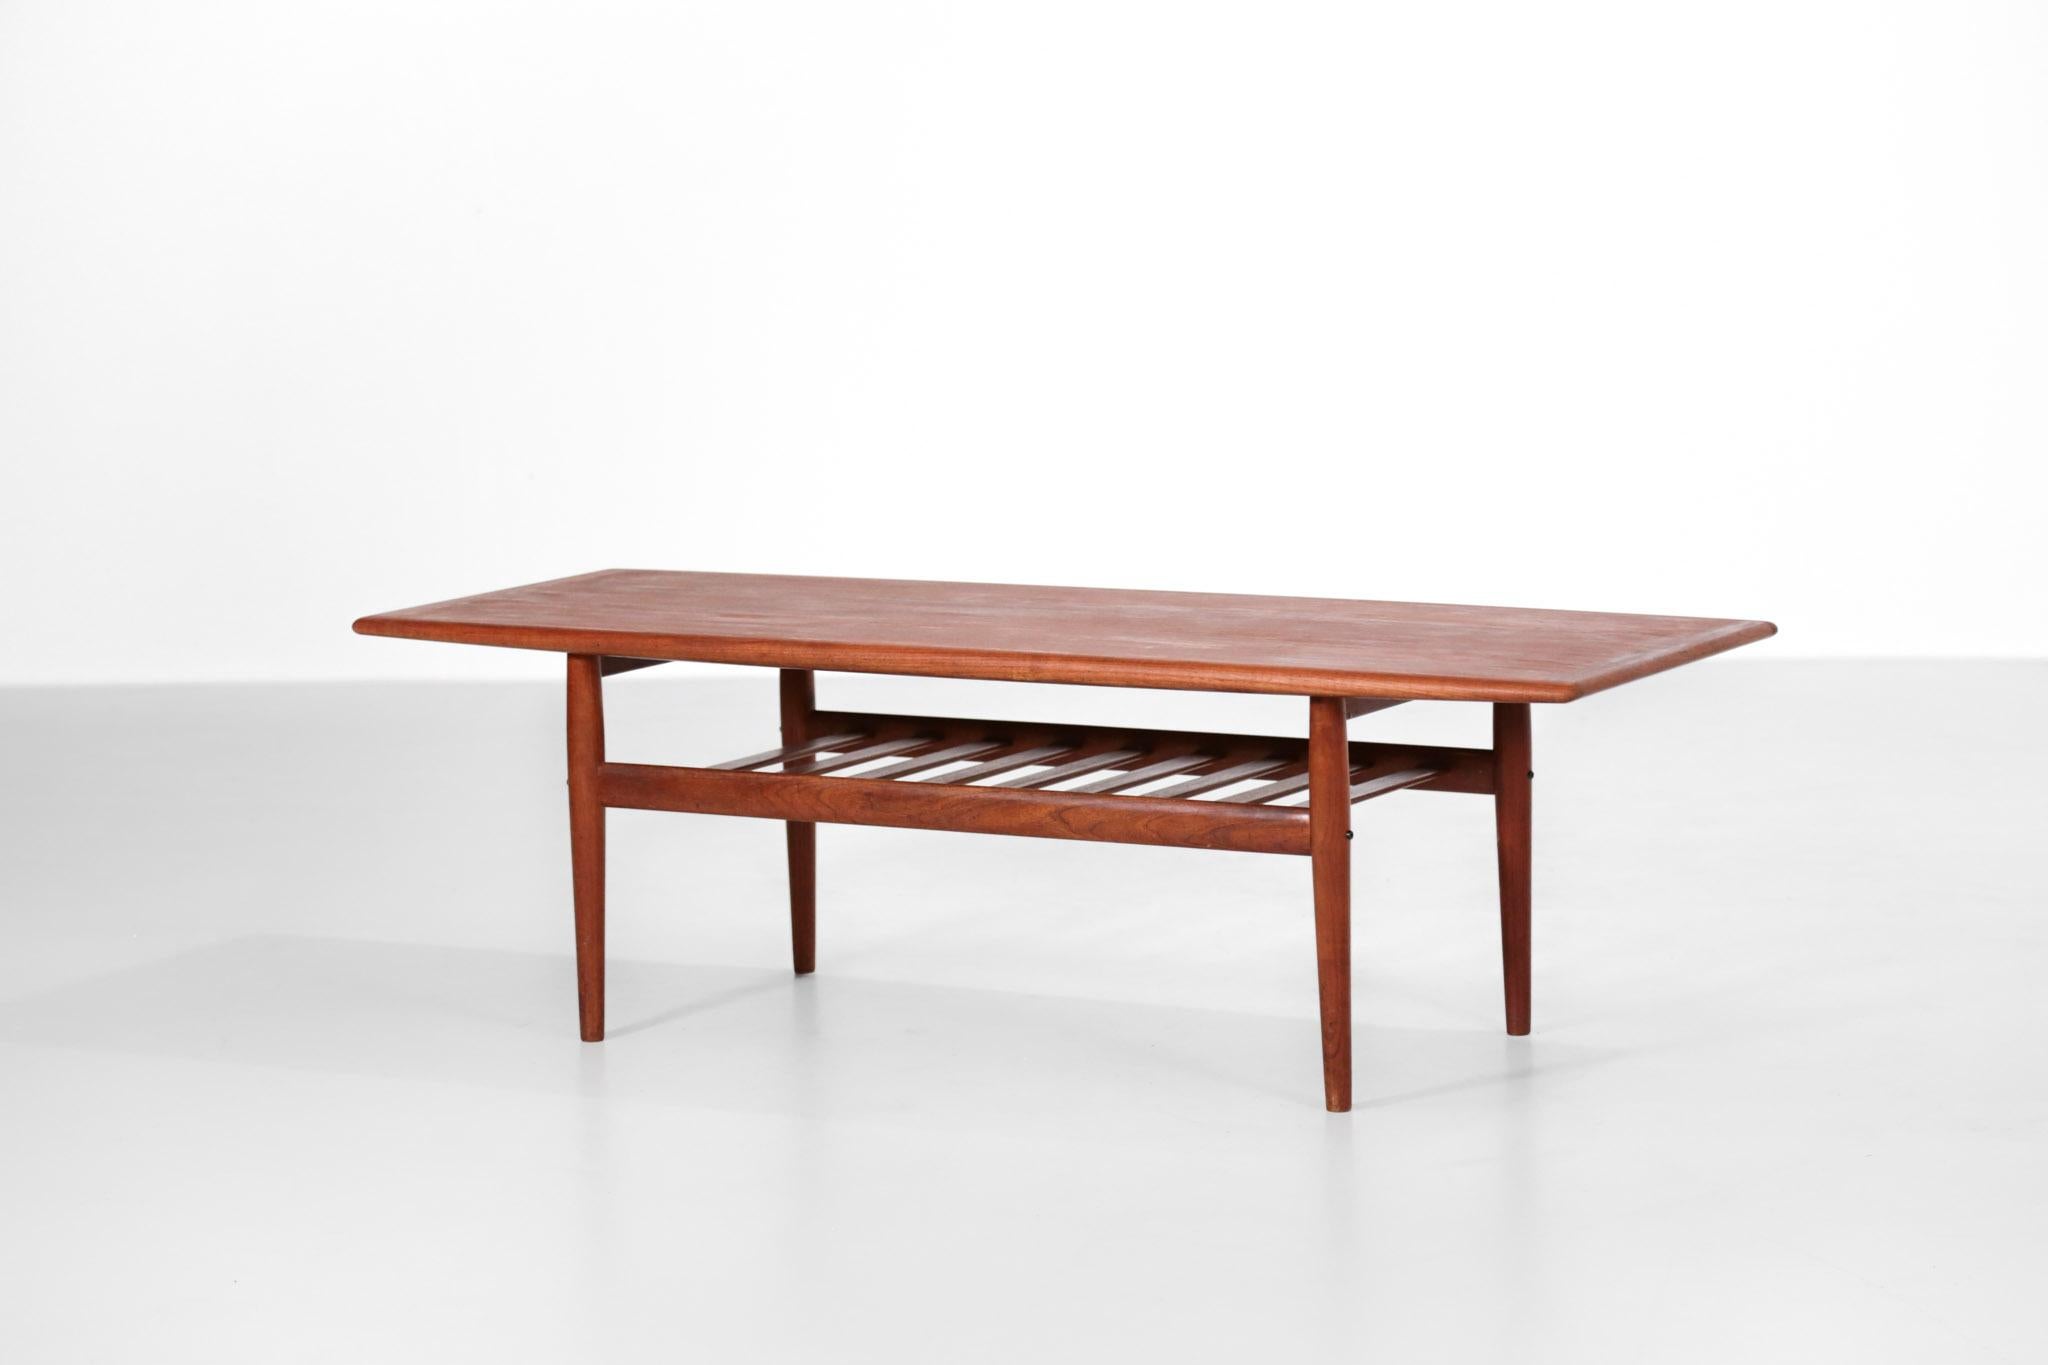 Nice Scandinavian coffee table designed by Grete Jalk for Glostrup.
Made of teak.